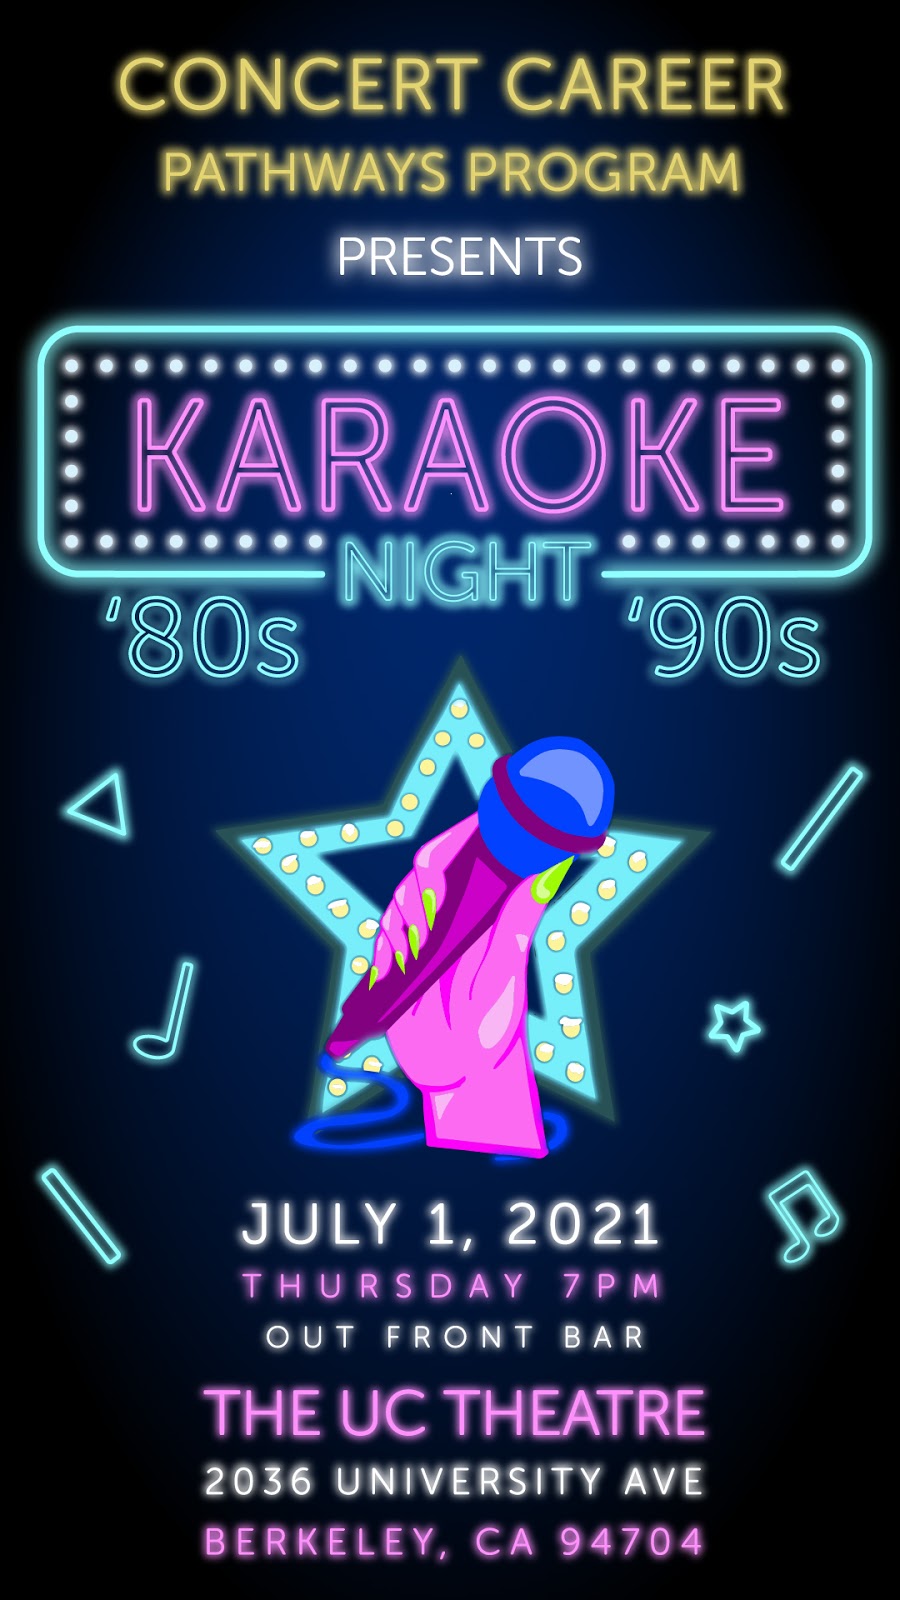 Concert Career Pathways presents: 80's/90's Karaoke Night Out Front Bar Image for Concert Career Pathways presents: 80's/90's Karaoke Night Out Front Bar on 2021-07-01